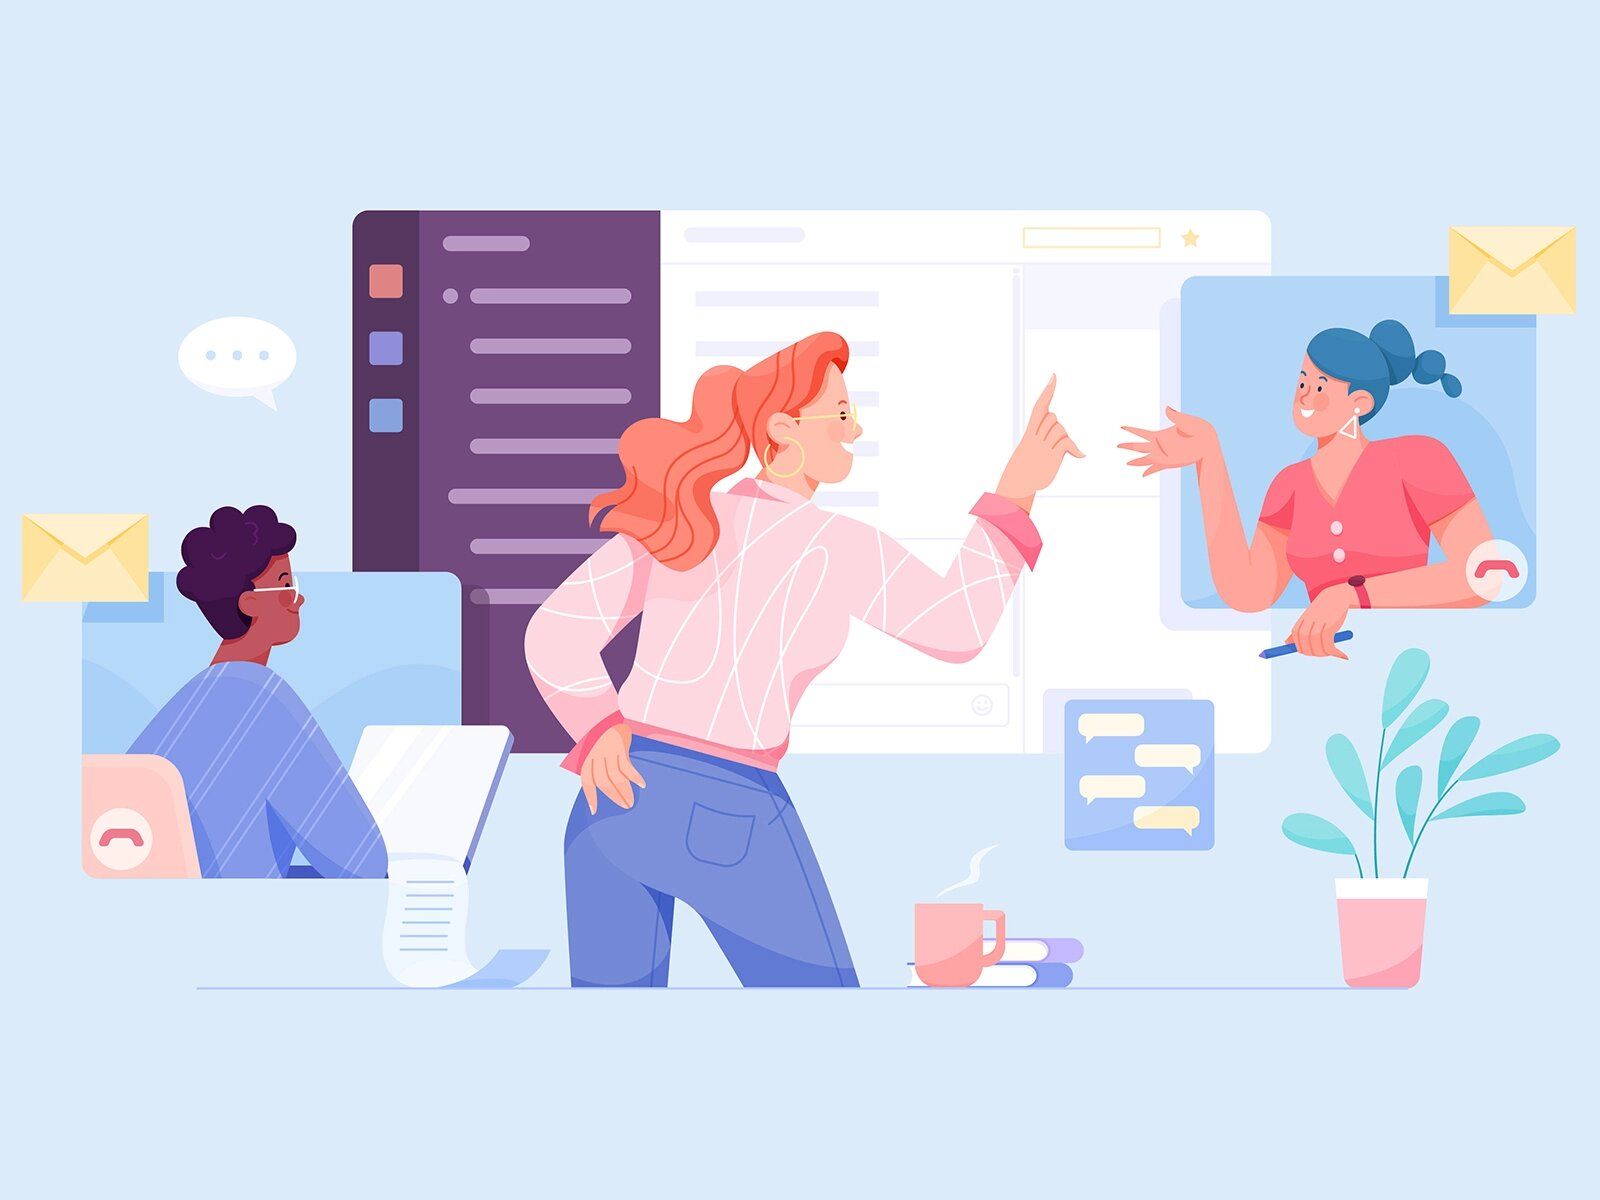 Work from home allows team members to save about 40 minutes of daily commuting in average (*image by [Felic Art Team](https://dribbble.com/felicdesign){ rel="nofollow" target="_blank" .default-md}*)